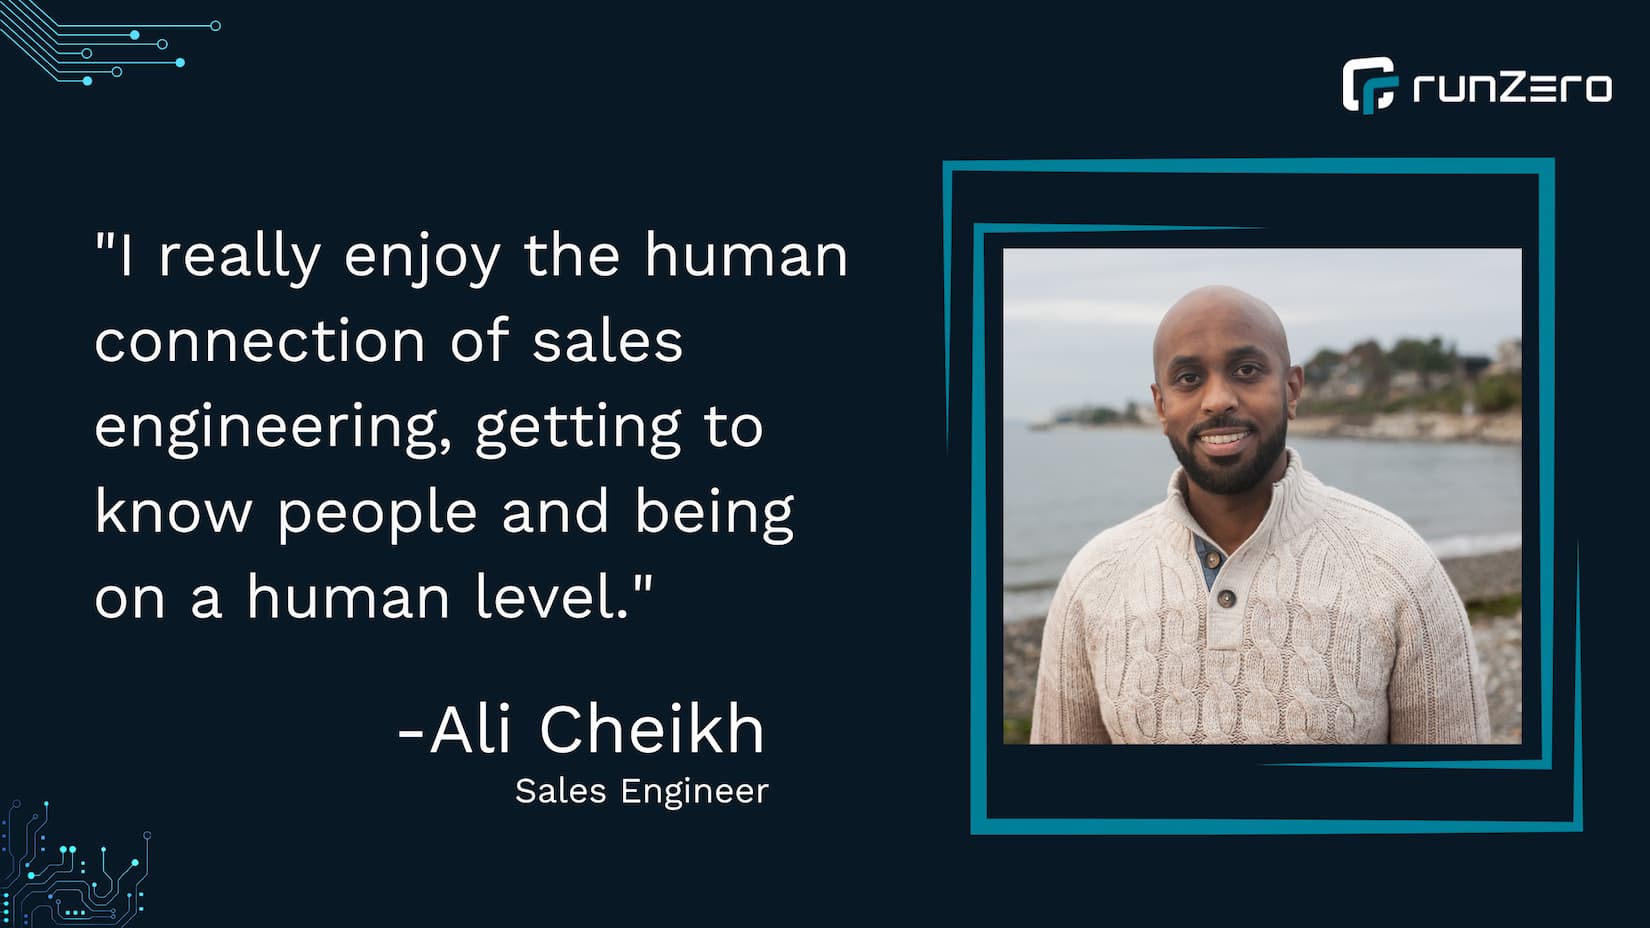 "I really enjoy the human connection of sales engineering, getting to know people and being on a human level."